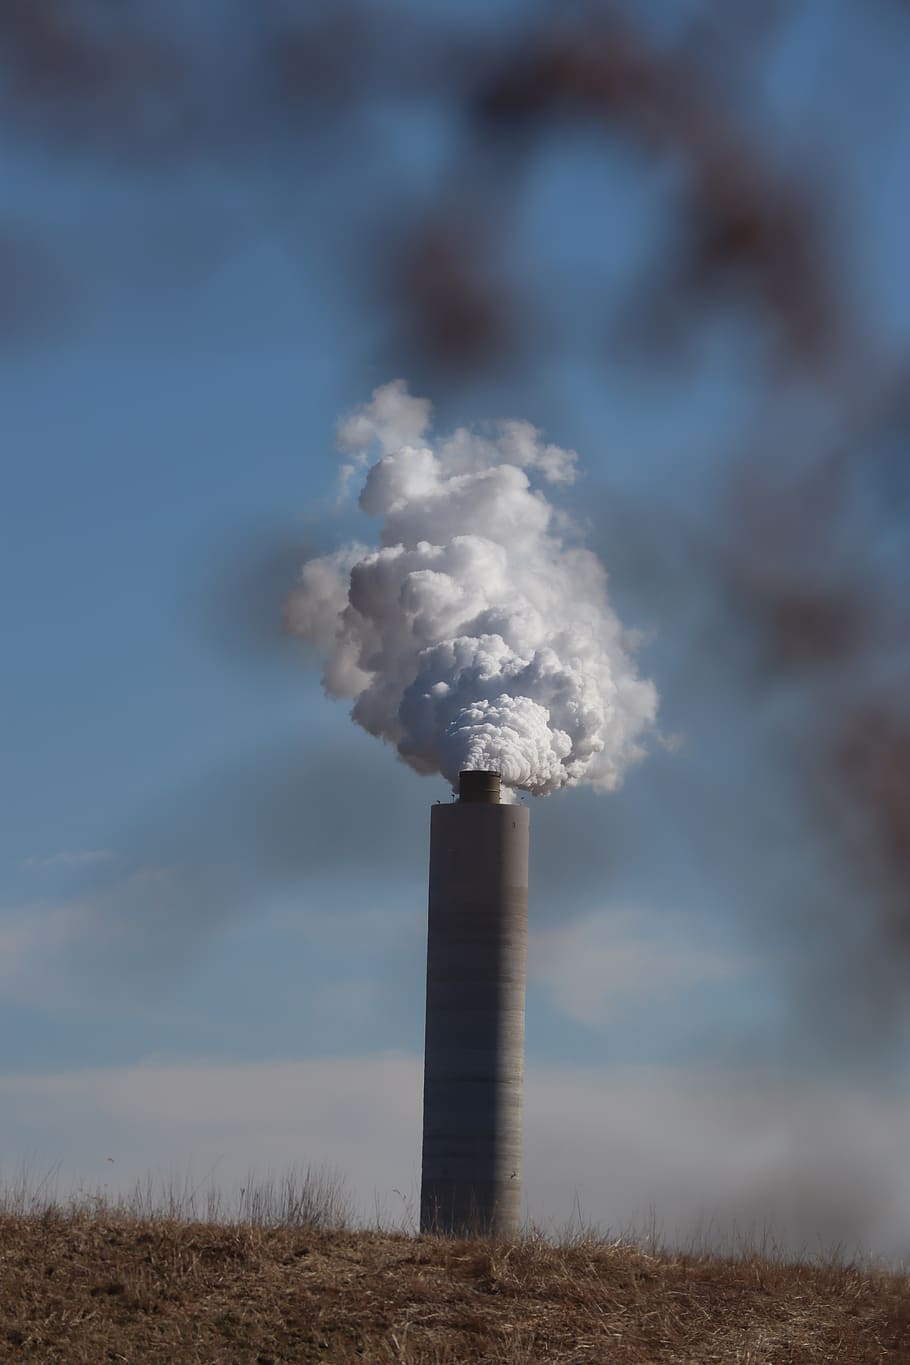 pollution, air pollution, smoke, smokestack, power plant, plant, dead, foliage, smoke - physical structure, environment